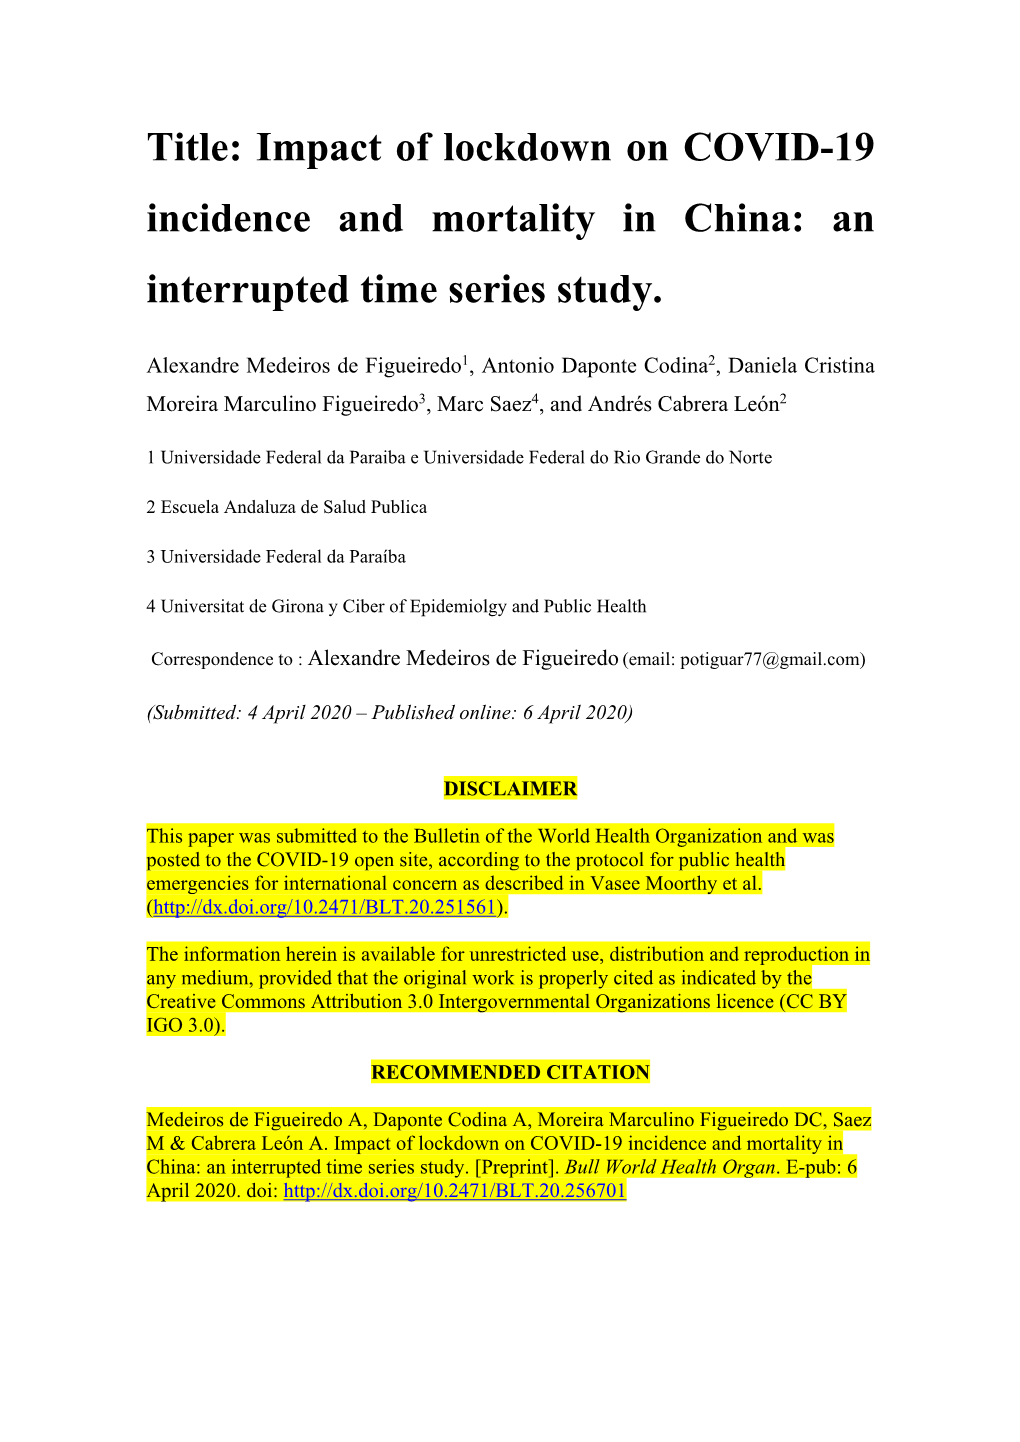 Impact of Lockdown on COVID-19 Incidence and Mortality in China: an Interrupted Time Series Study